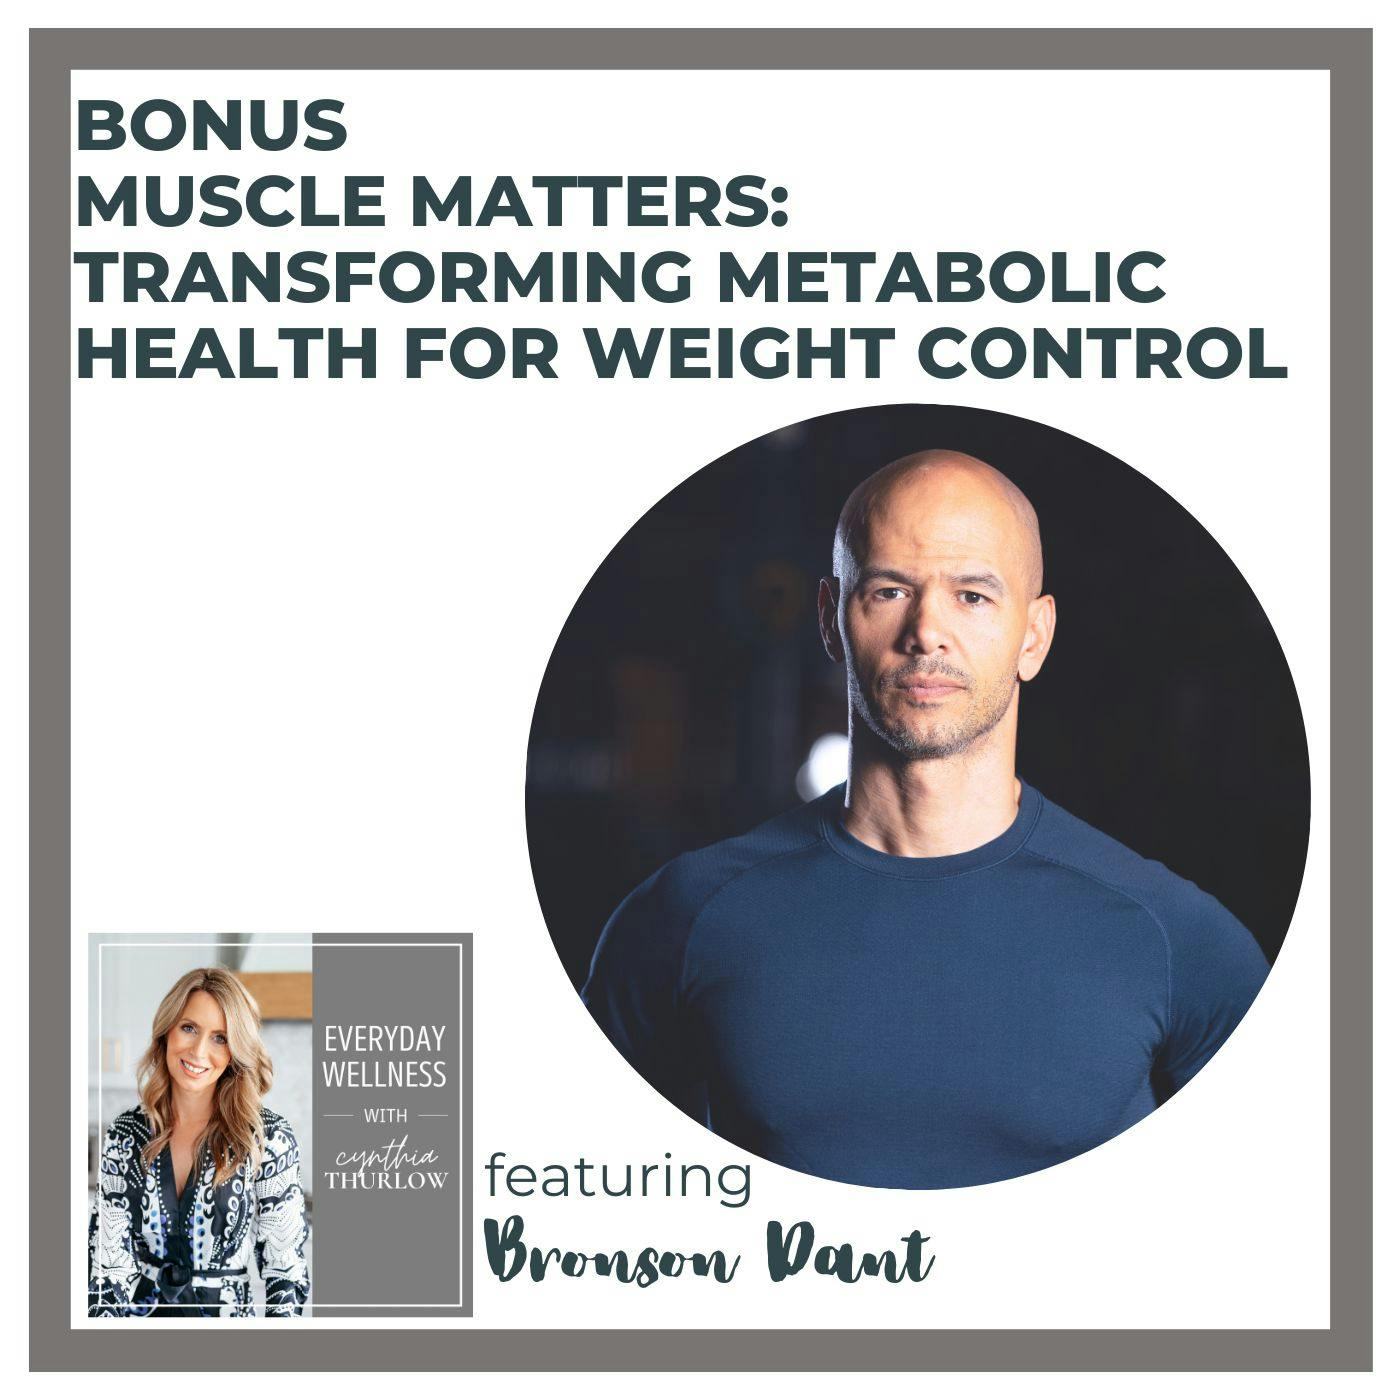 BONUS Muscle Matters: Transforming Metabolic Health for Weight Control with Bronson Dant